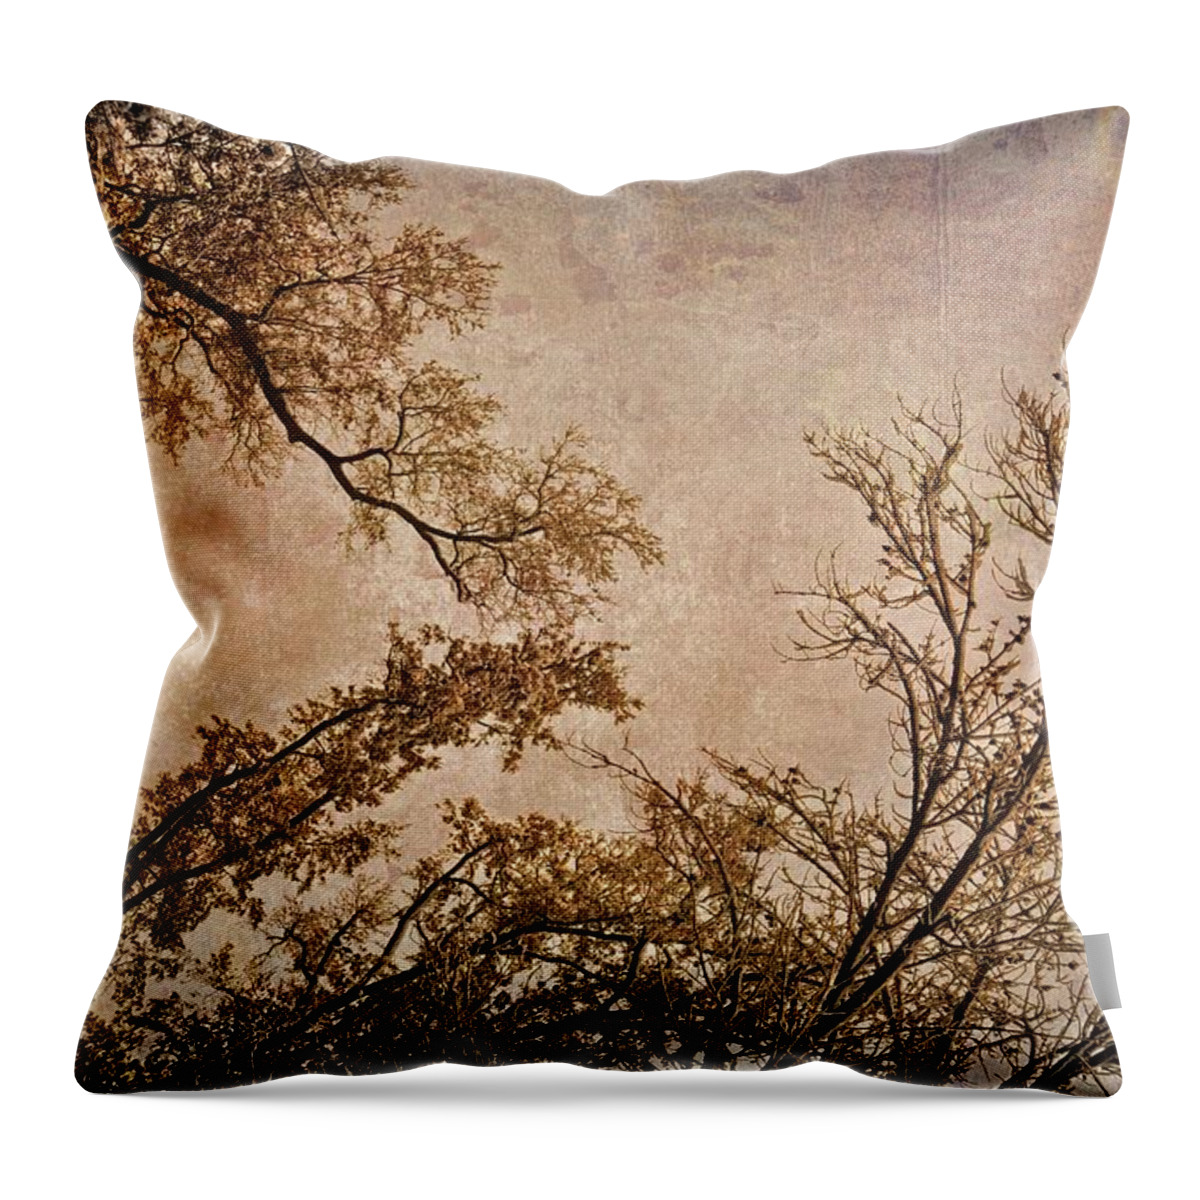 Landscape Throw Pillow featuring the photograph Dancing Trees by Carol Whaley Addassi